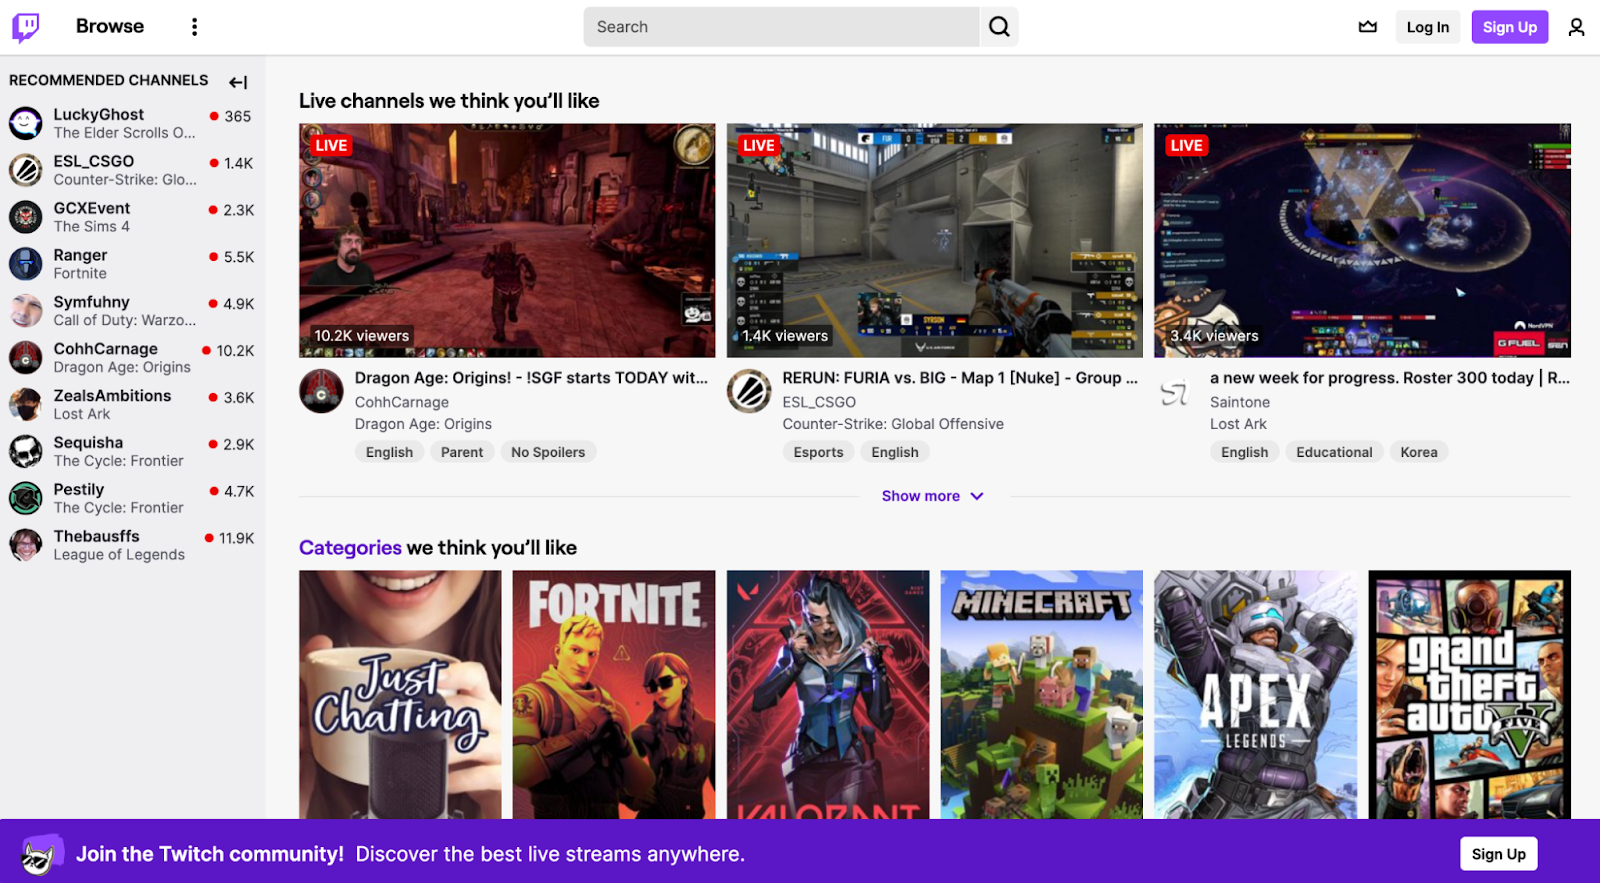 The Twitch homepage, showing recommended channels, live channels, and categories.